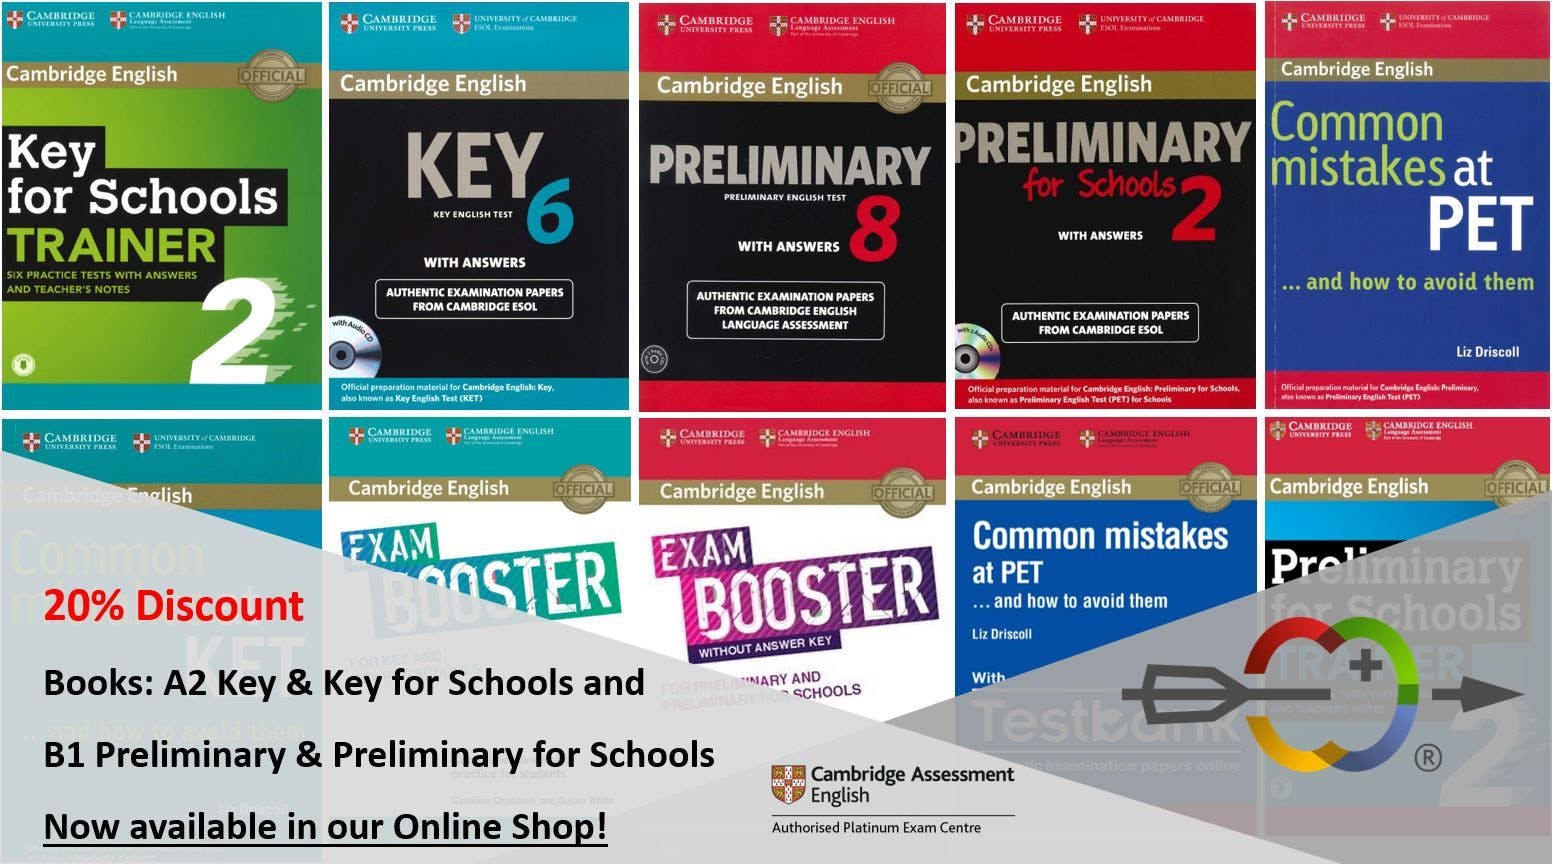 Preparation Material: Special Sale on books for A2 Key and Key for Schools and B1 Preliminary and Preliminary for Schools